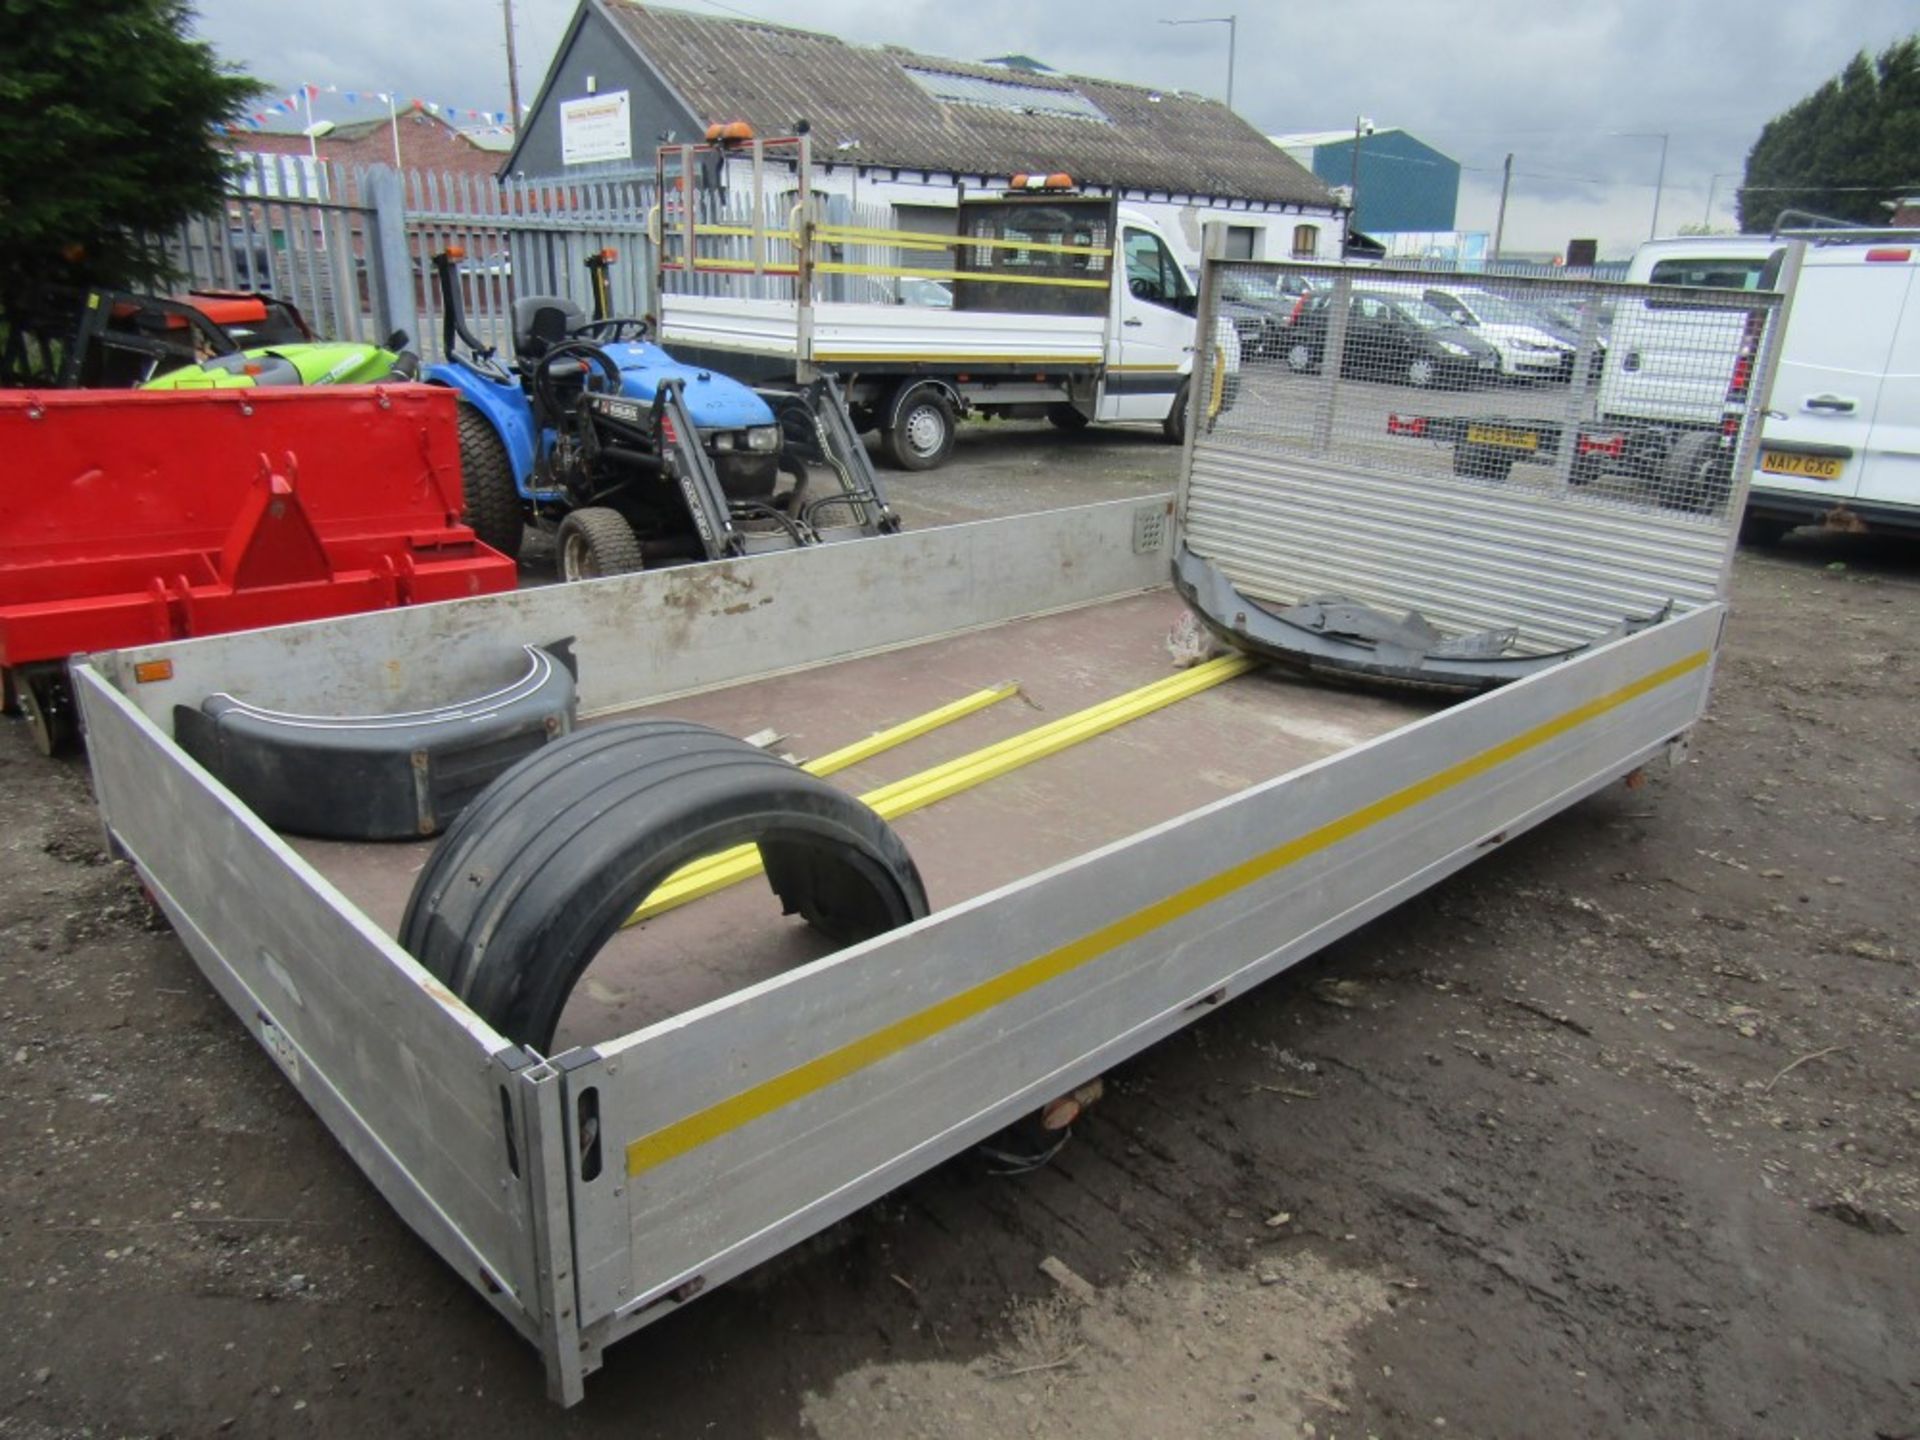 GRP ALLOY DROPSIDE 13'6" WITH 2 SETS OF WHEEL ARCHES & YELLOW SAFETY RAILS [+ VAT] - Image 2 of 2